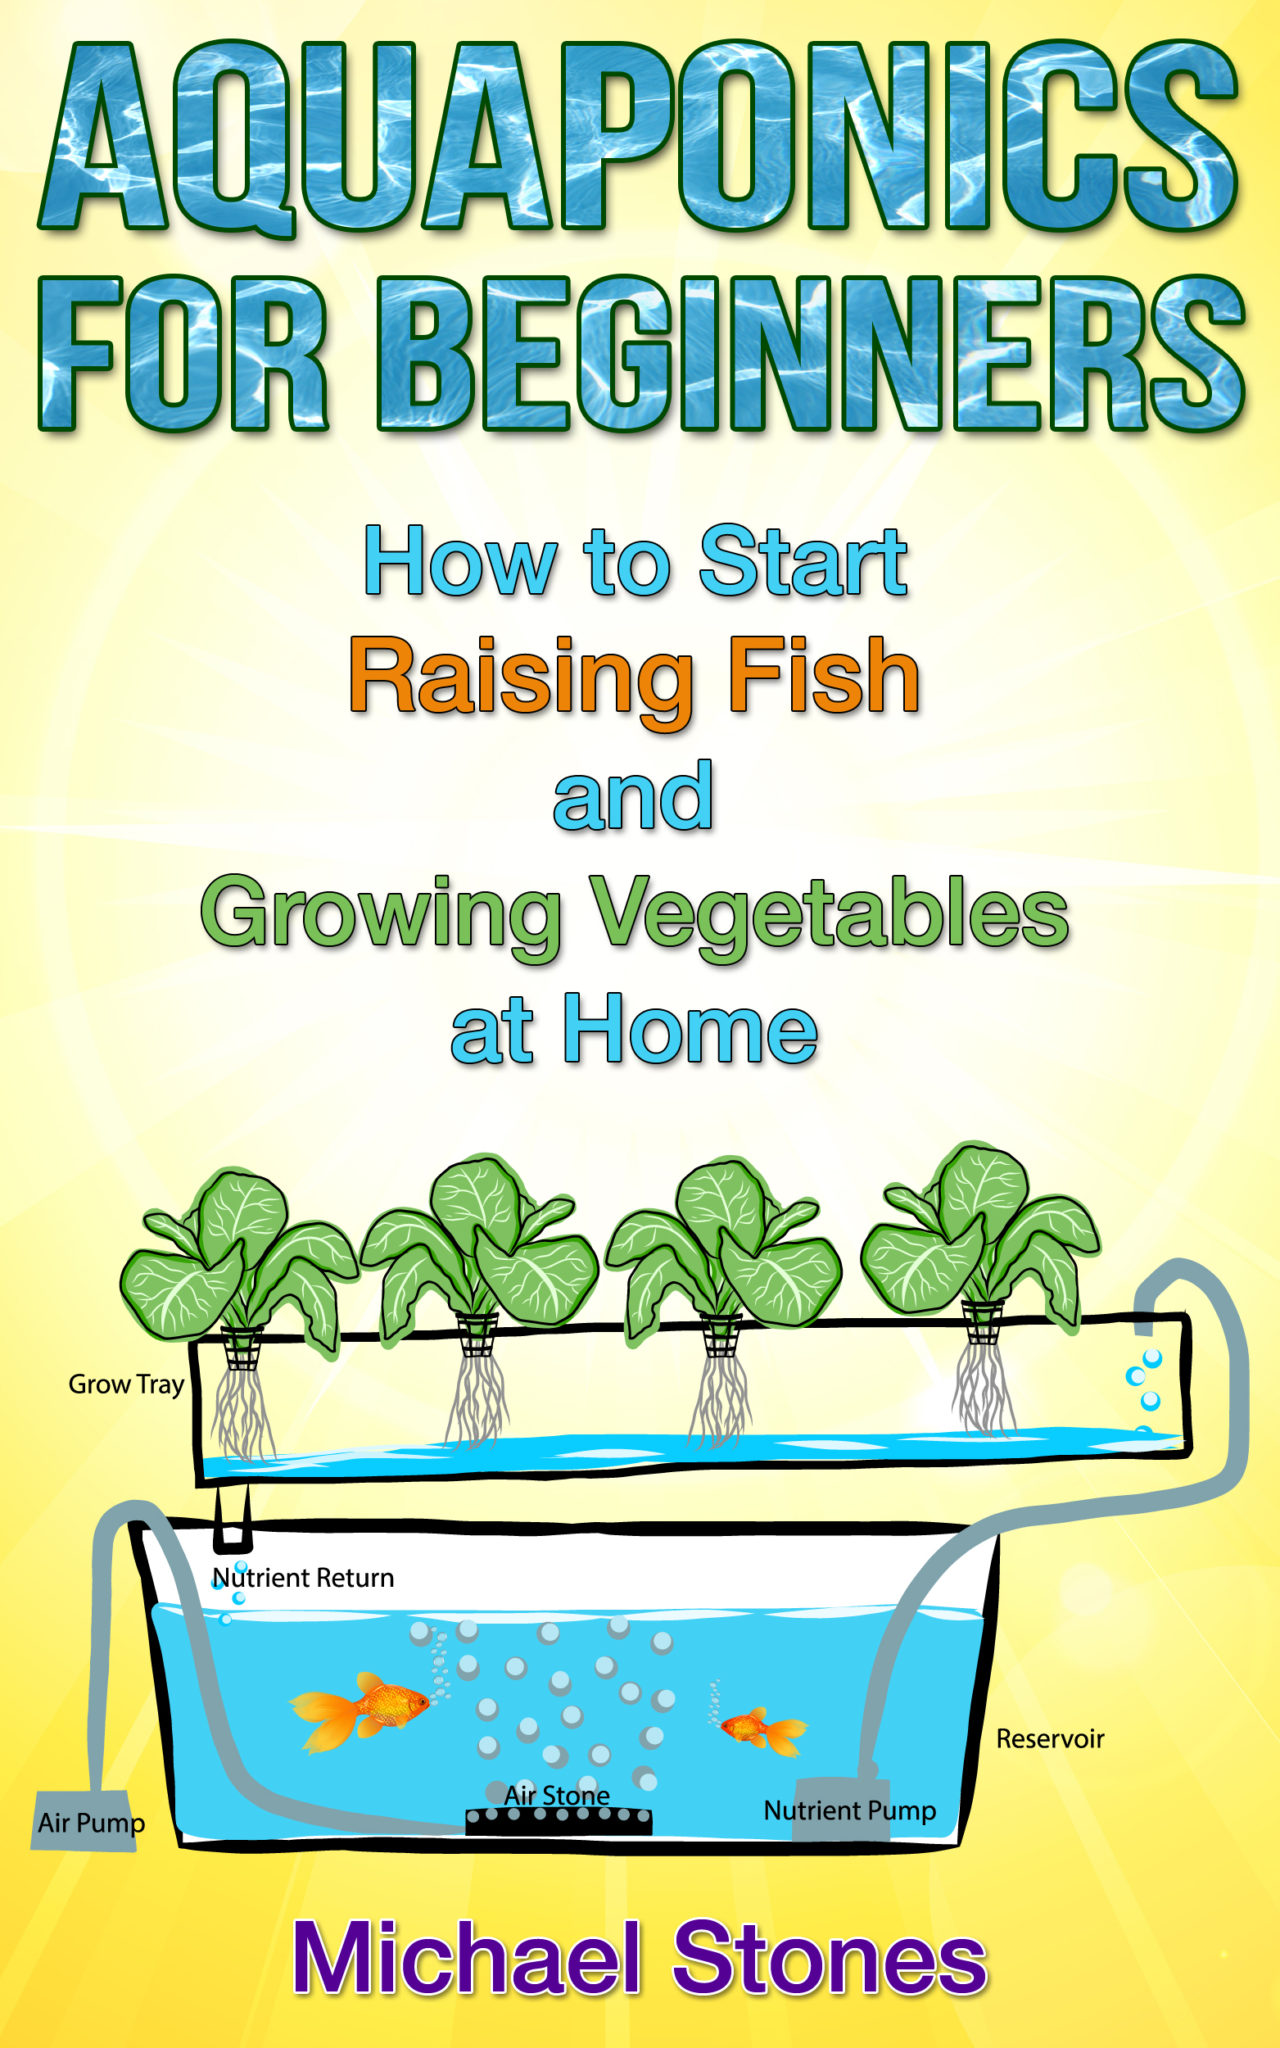 Aquaponics for Beginners – How To Start Raising Fish and Growing Vegetables at Home by Michael Stones